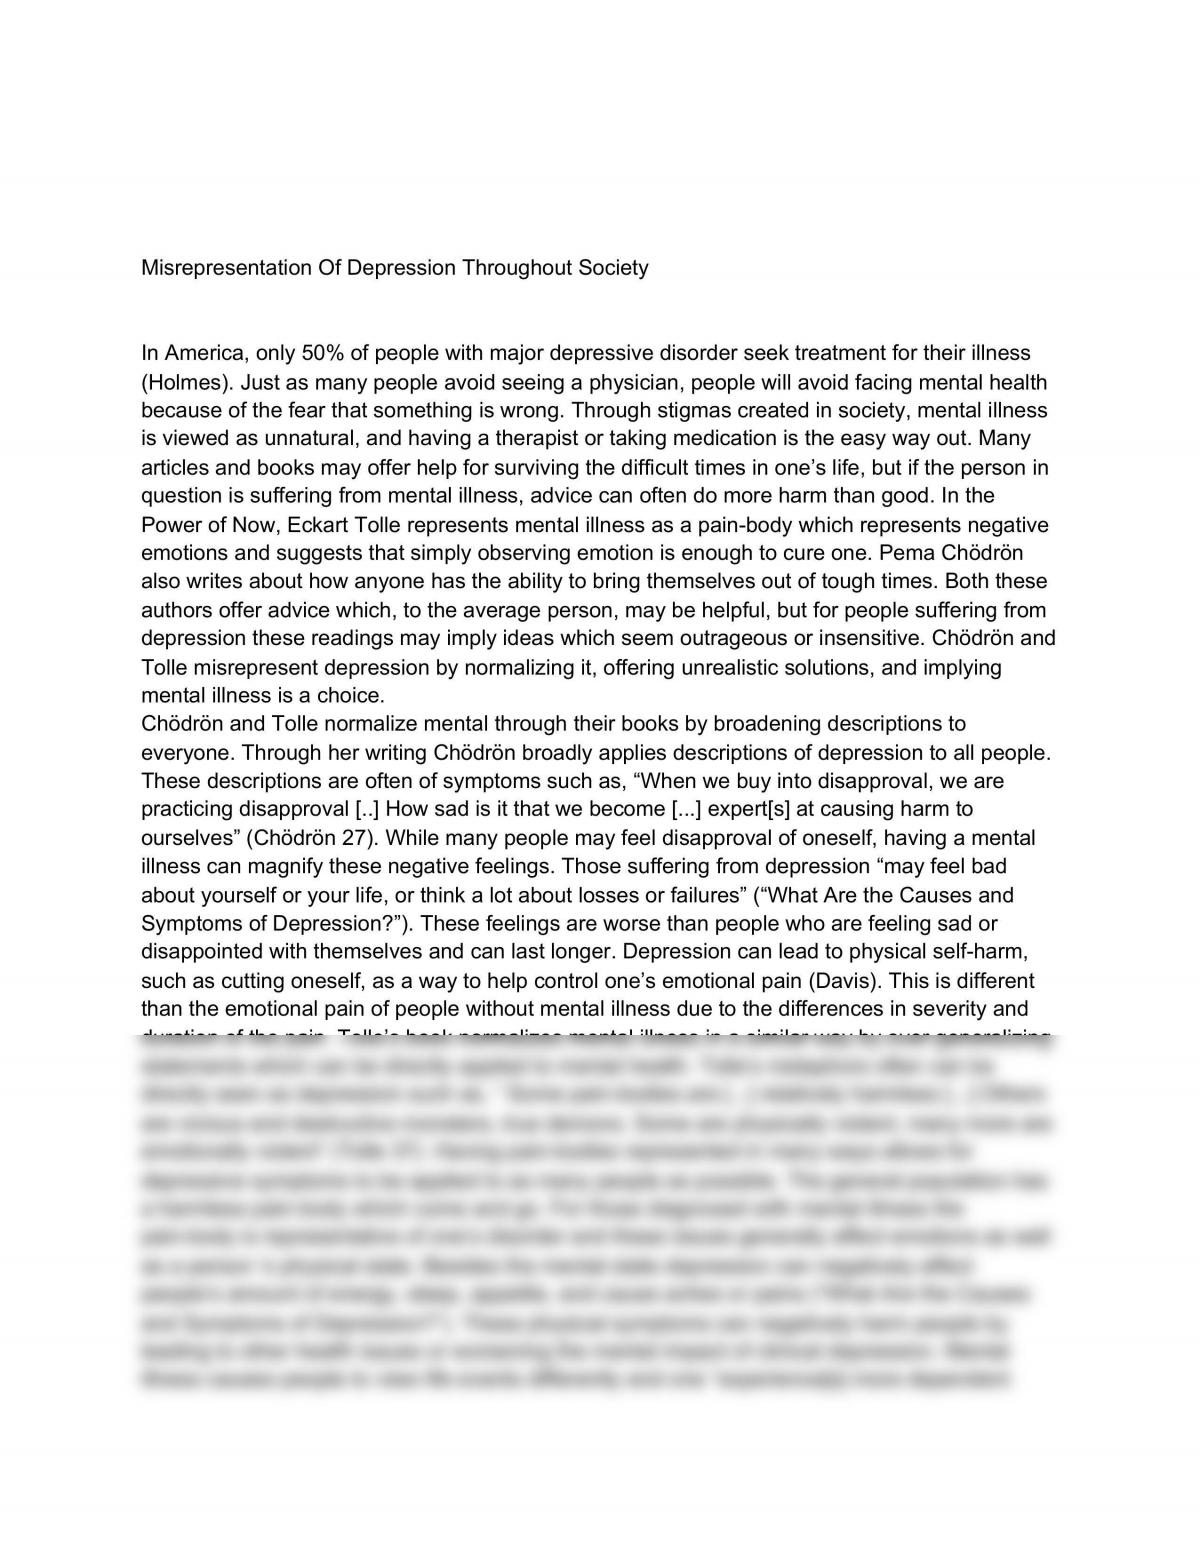 Misrepresentation Of Depression Throughout Society - Page 1